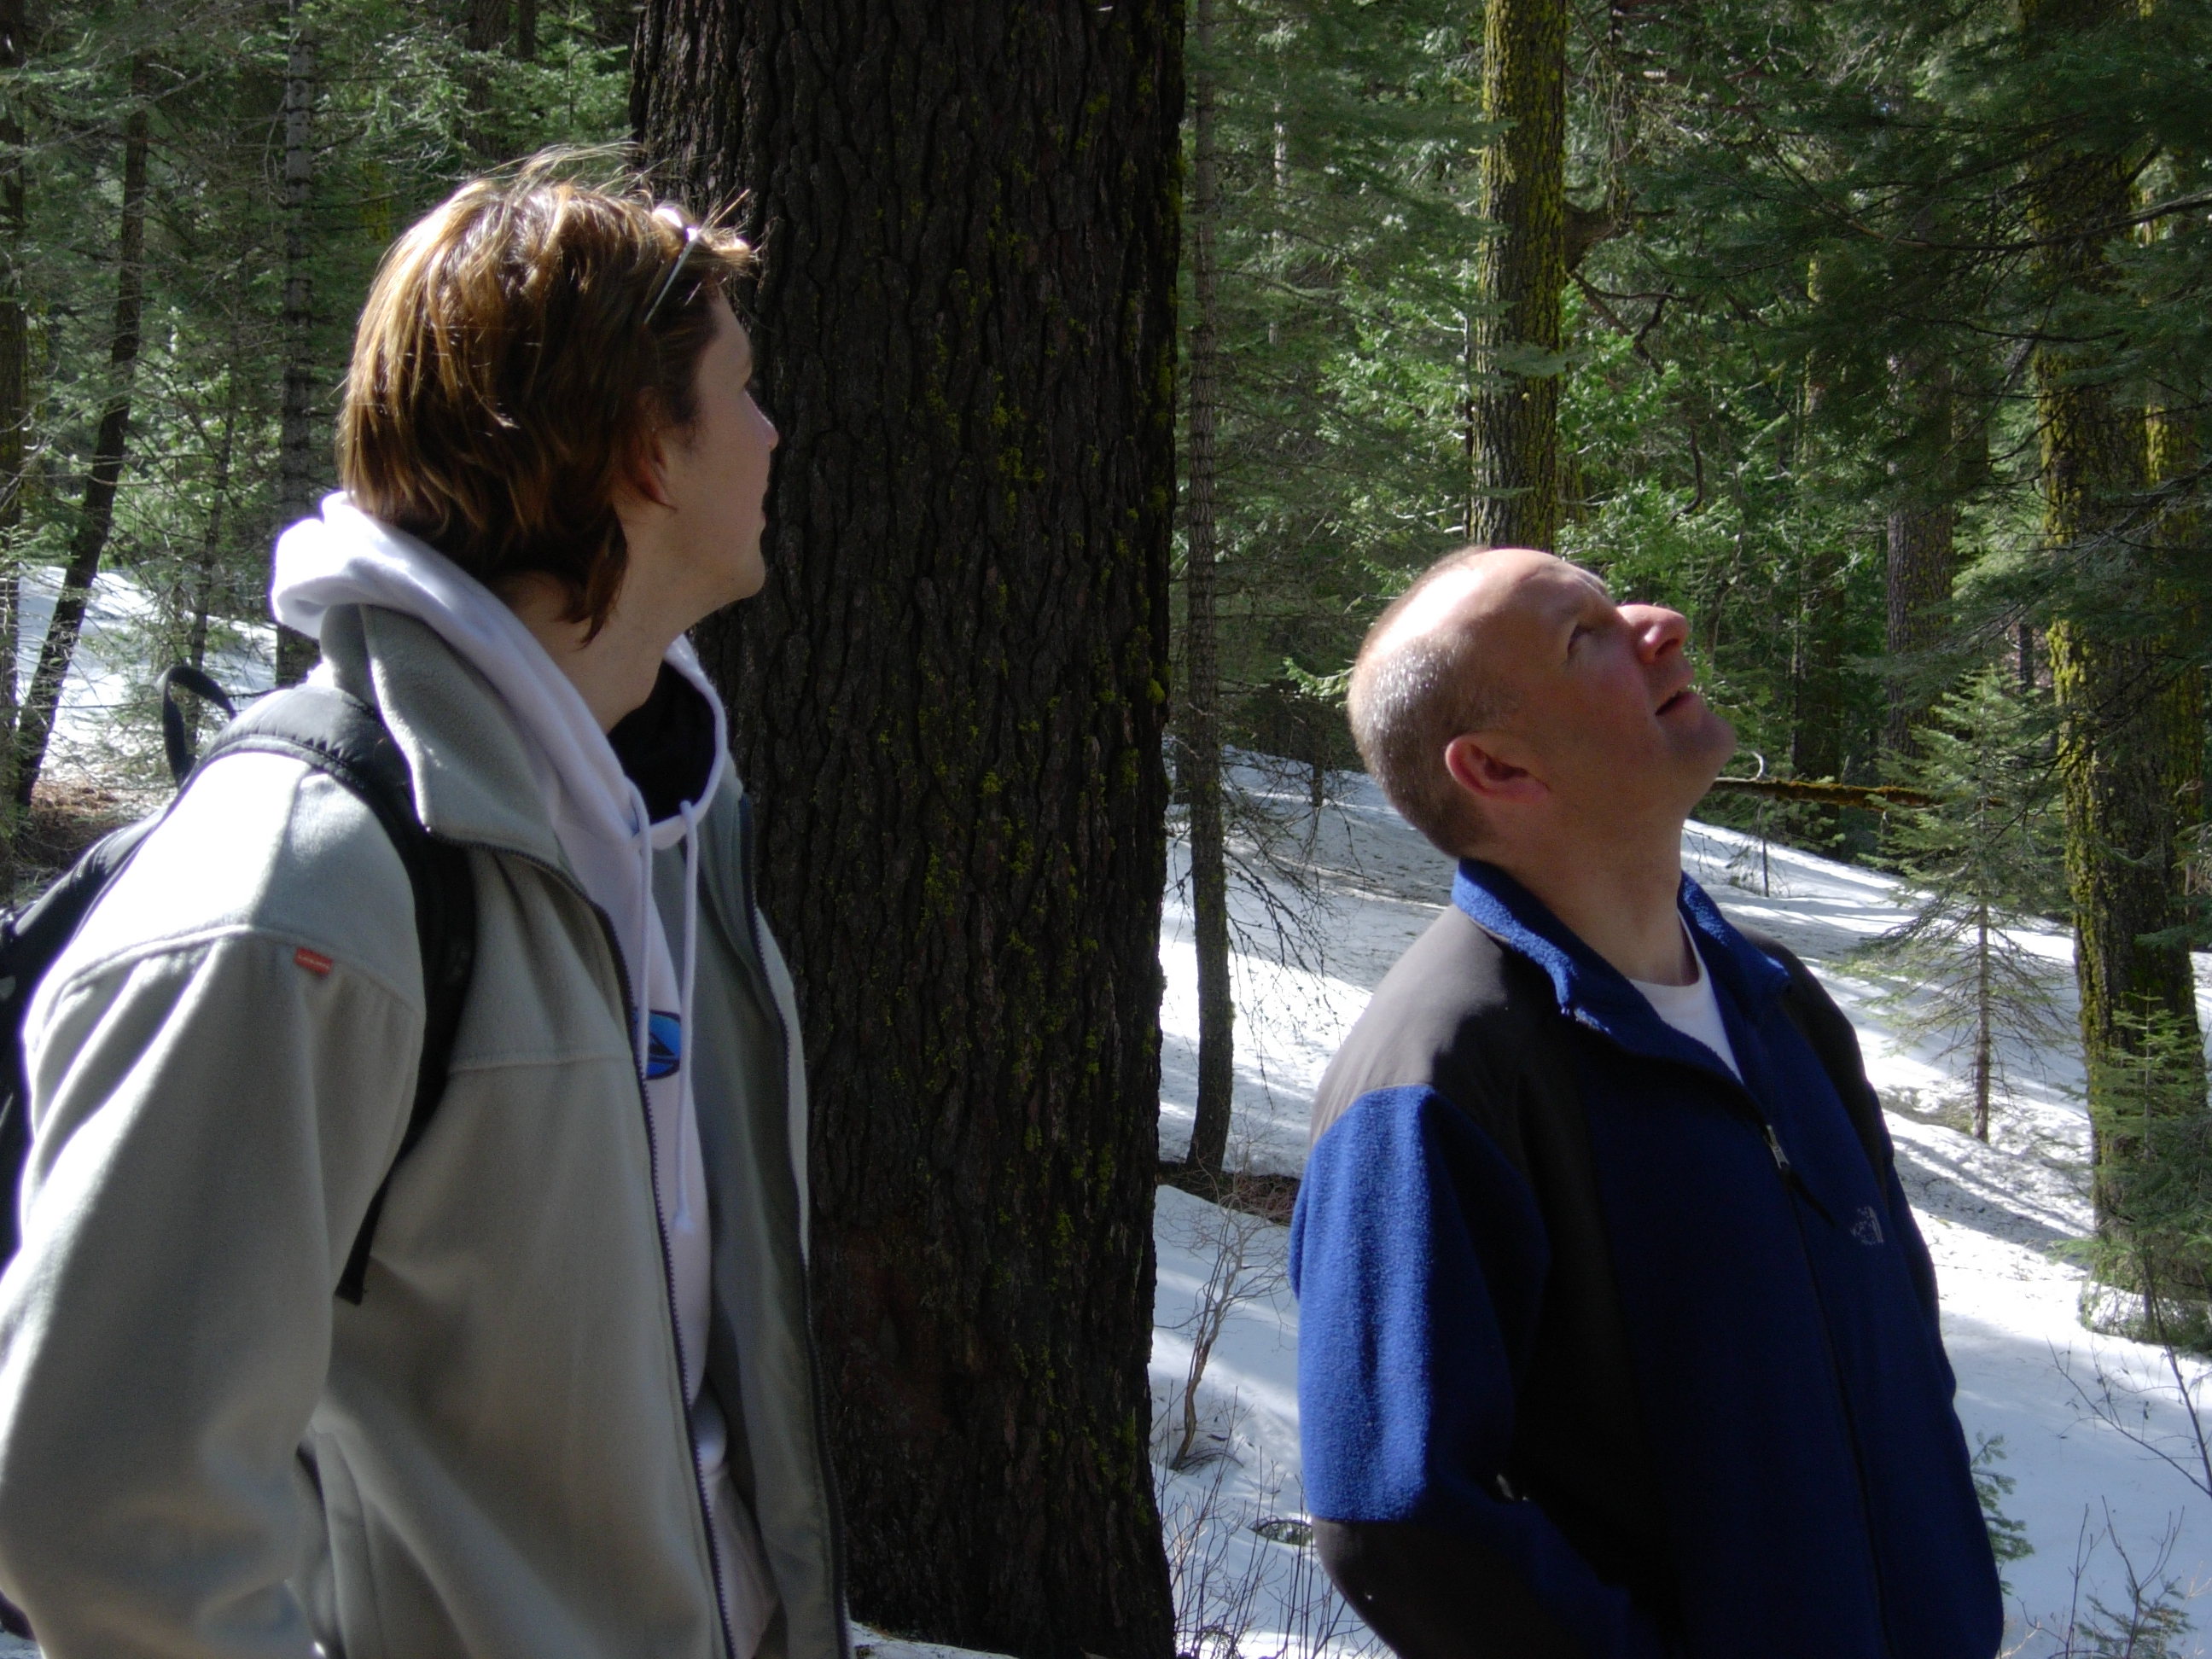 In Yosemite.  Rich and James